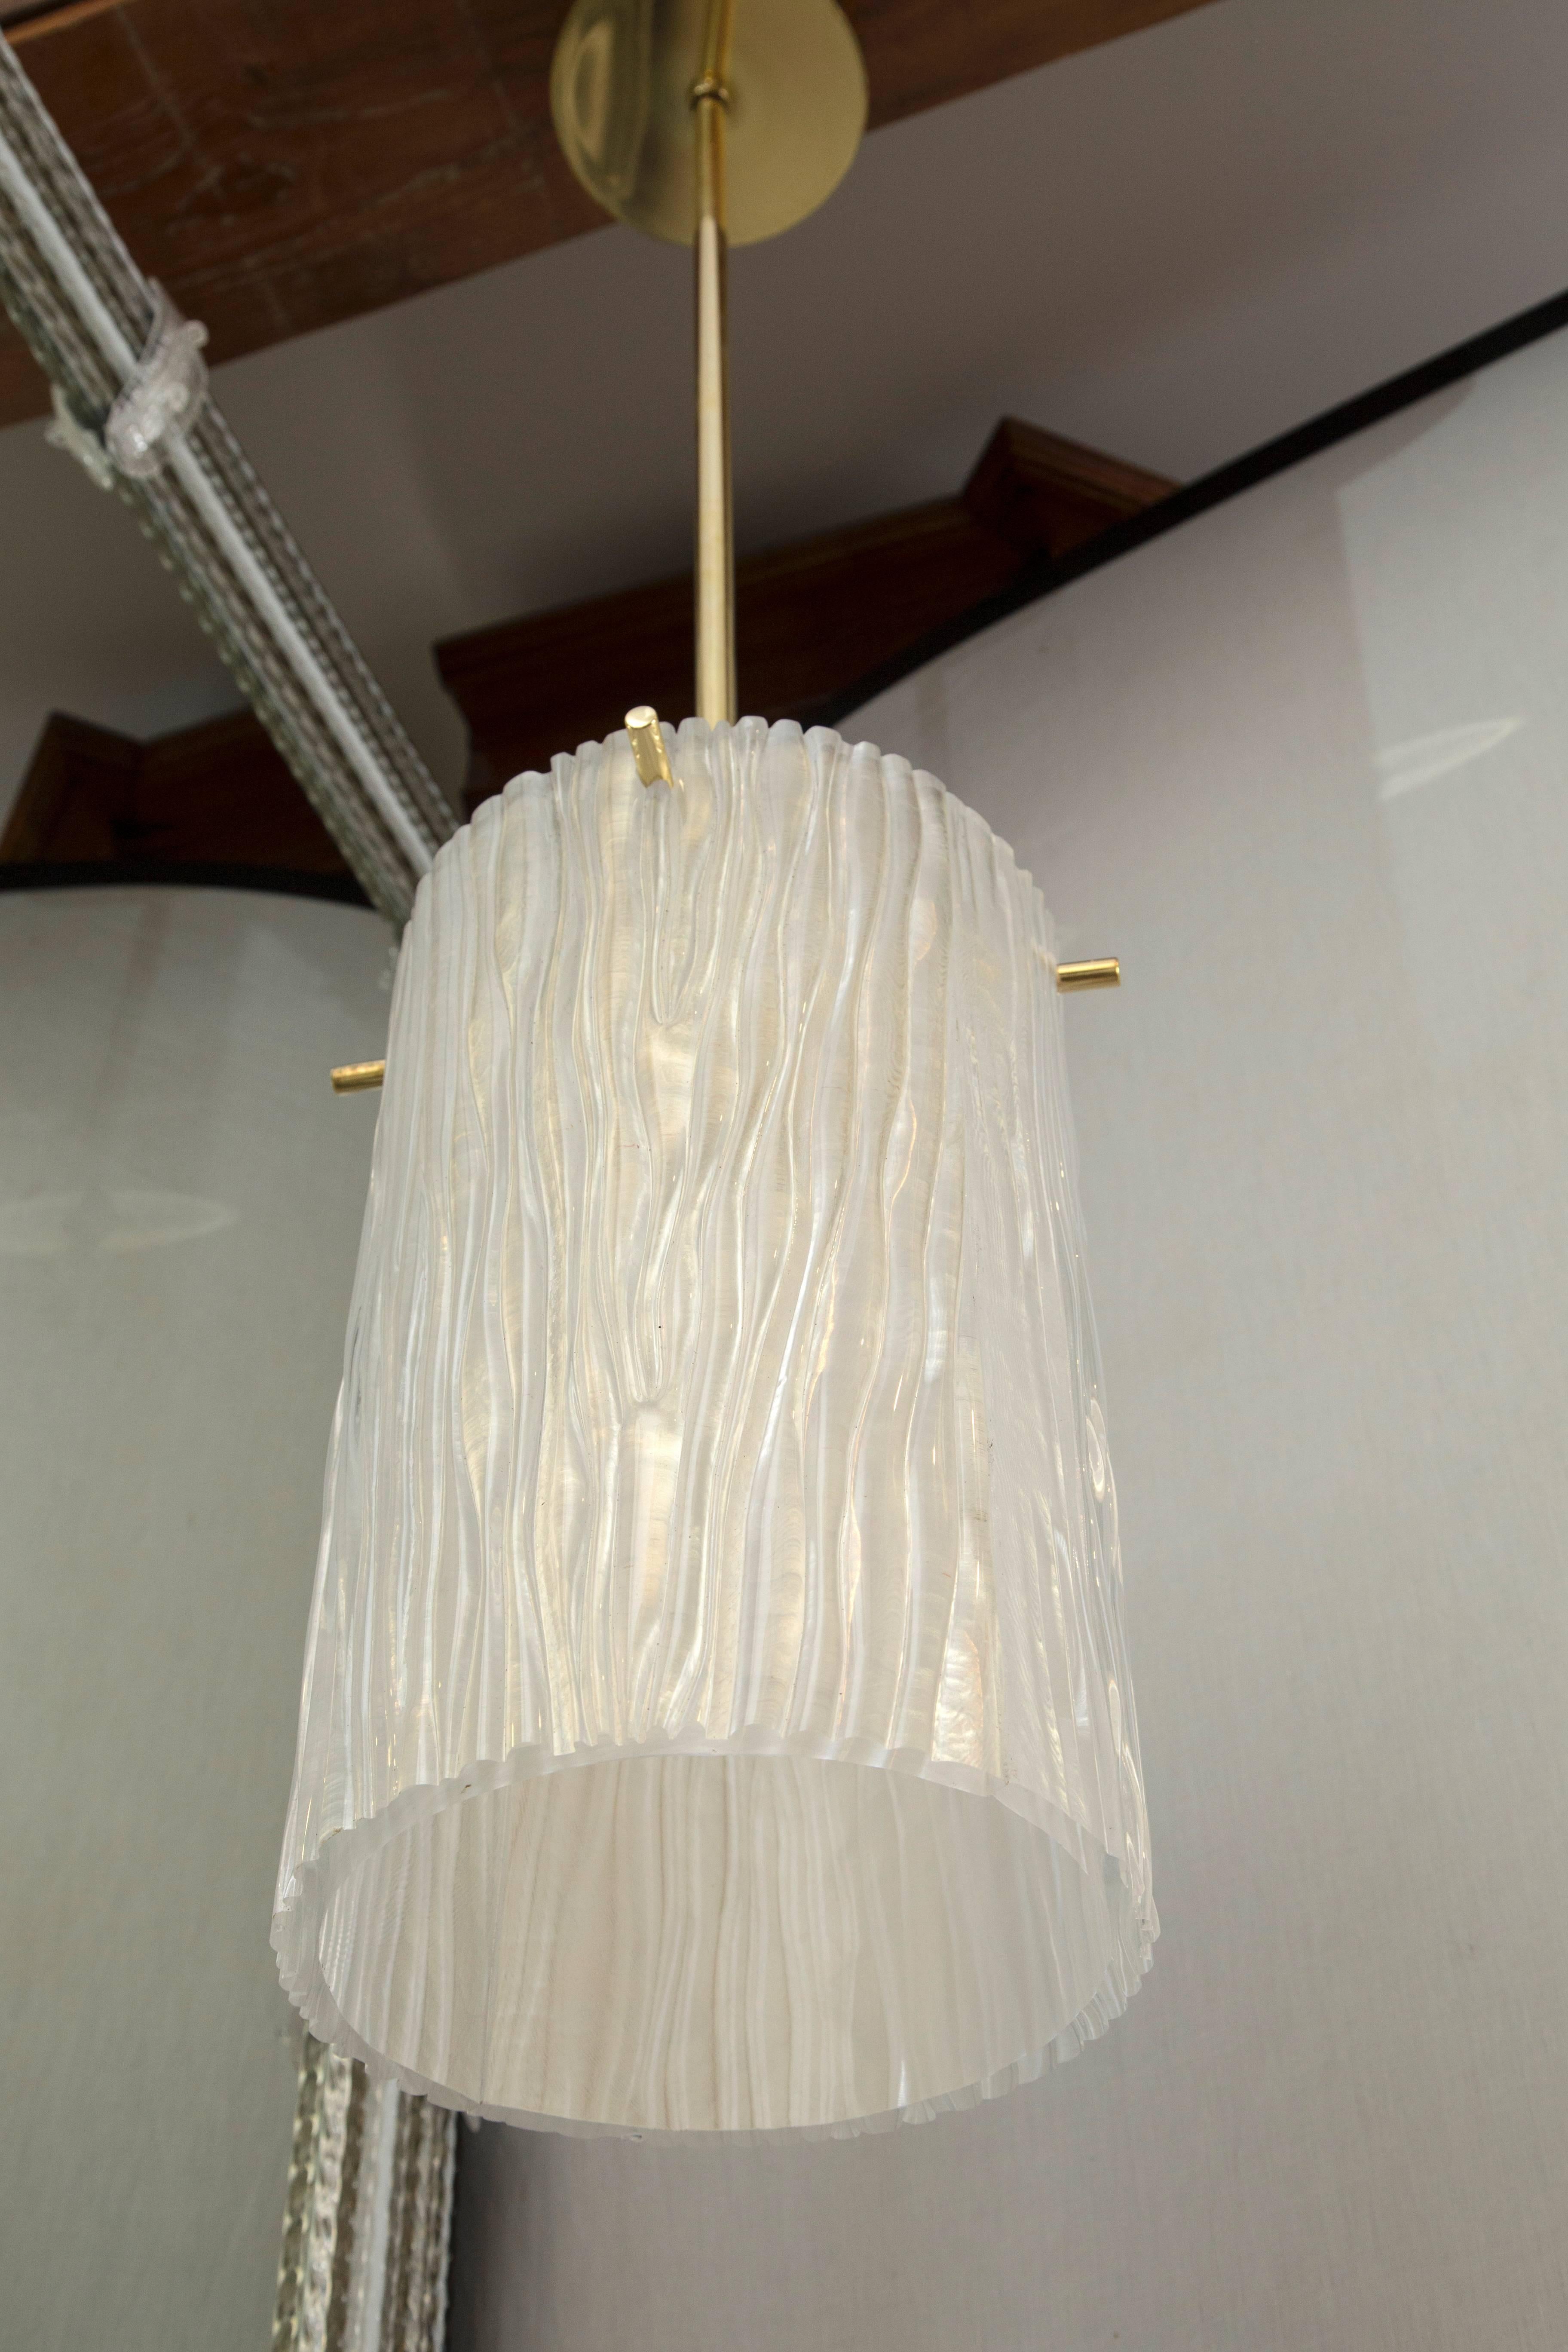 Fabulous iridescent white blown pendant, newly blown, made in Venice, Italy
note oversized dimensions
multiples available
Dimensions of glass:
14 1/8?
8 3/4? diameter
Overall height with brass stem 39?
Additionally stem heights can be made to